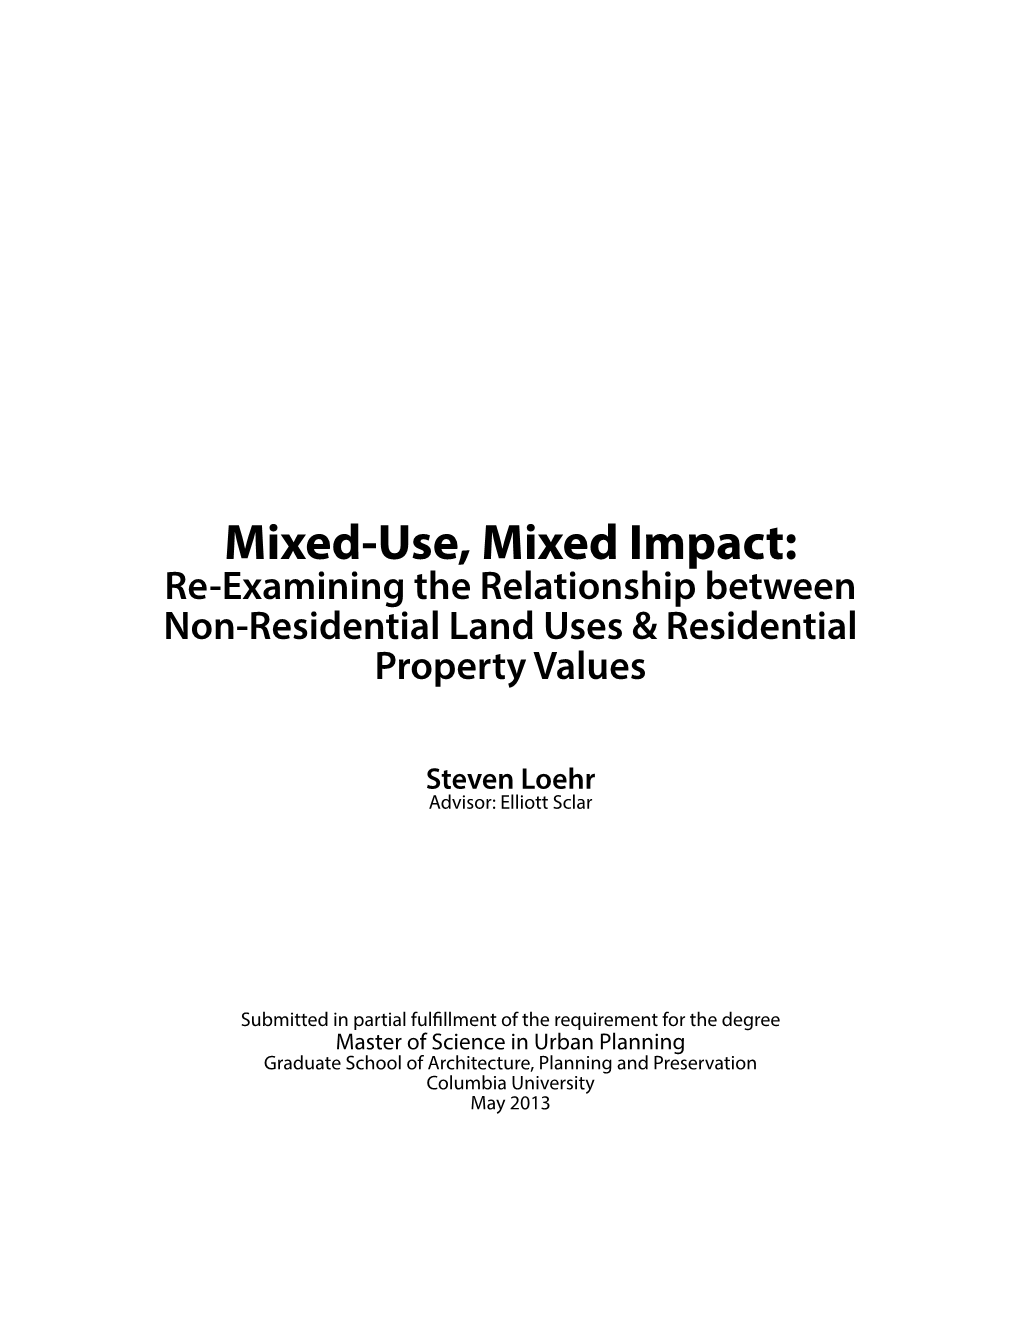 Mixed-Use, Mixed Impact: Re-Examining the Relationship Between Non-Residential Land Uses & Residential Property Values